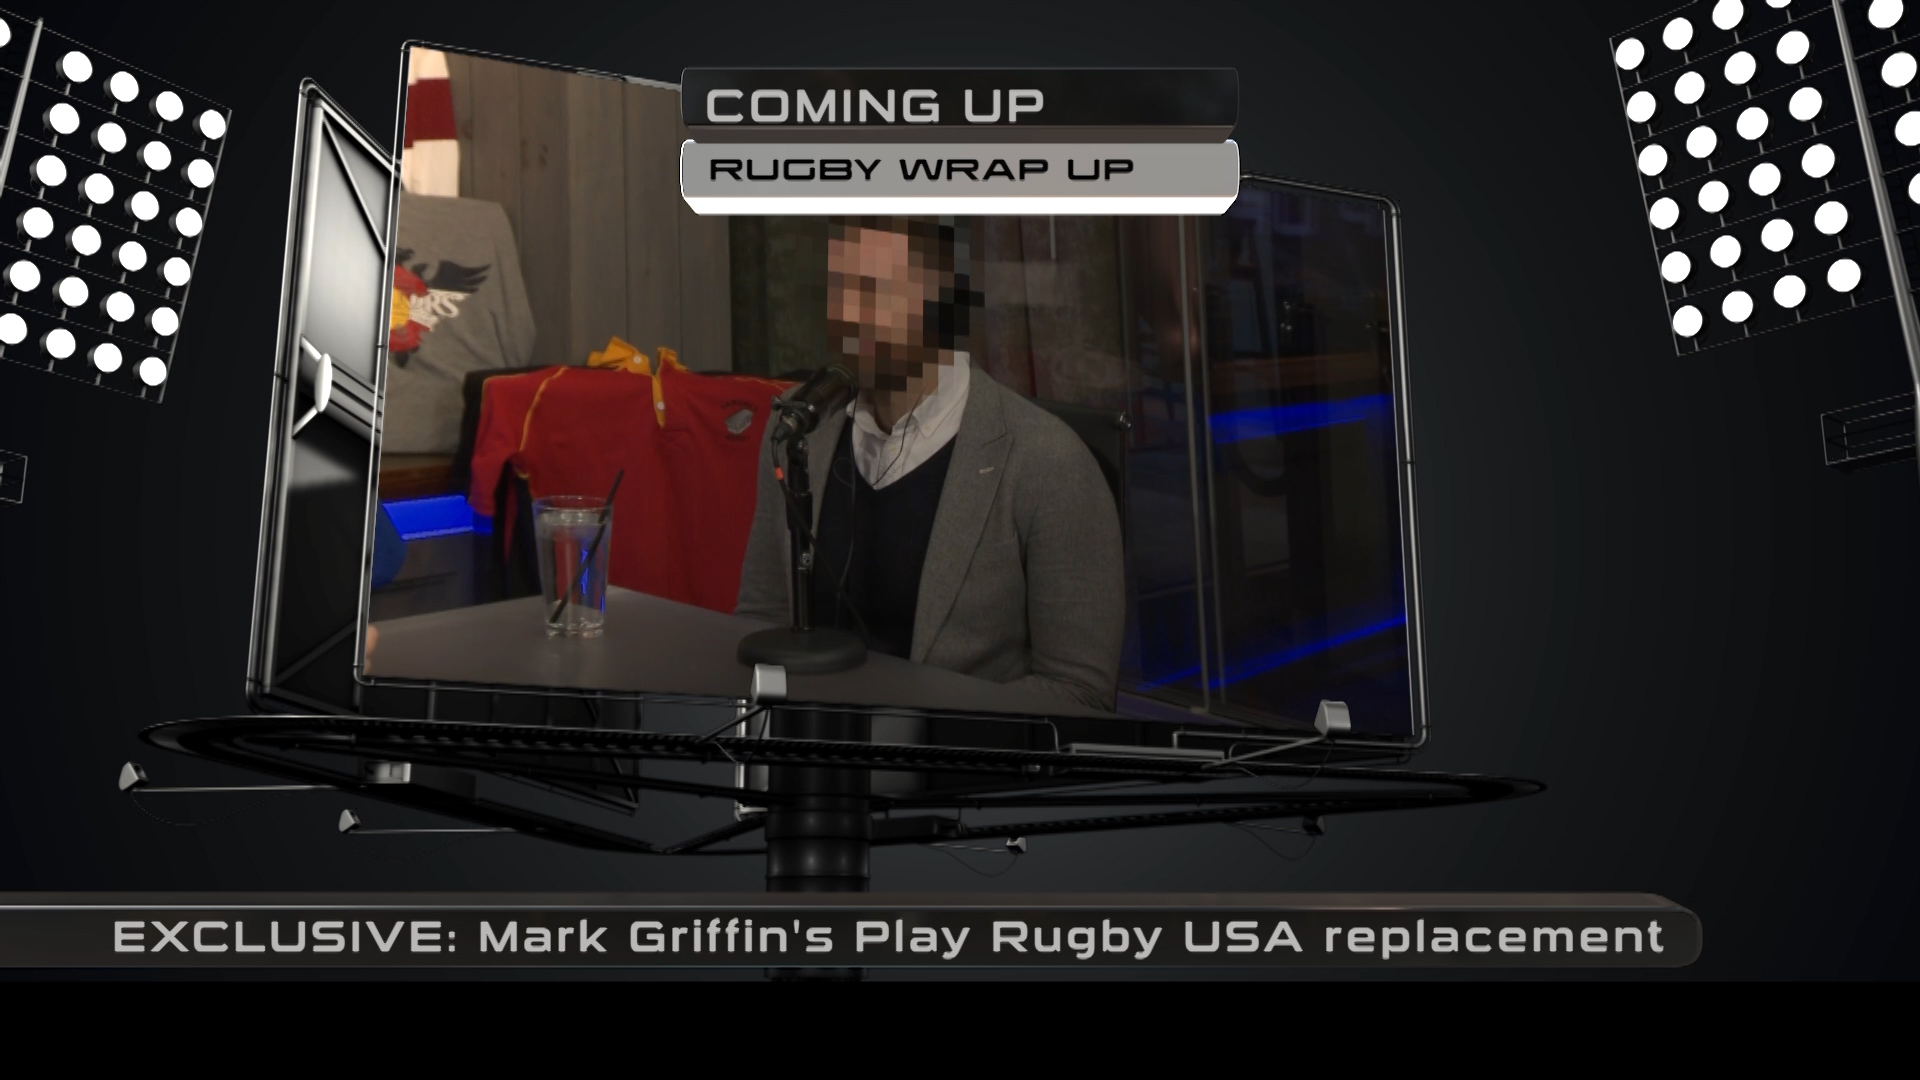 Play Rugby USA, Mark Griffin, Wil Snape, Steve Lewis, Matt McCarthy, Rugby_Wrap_Up